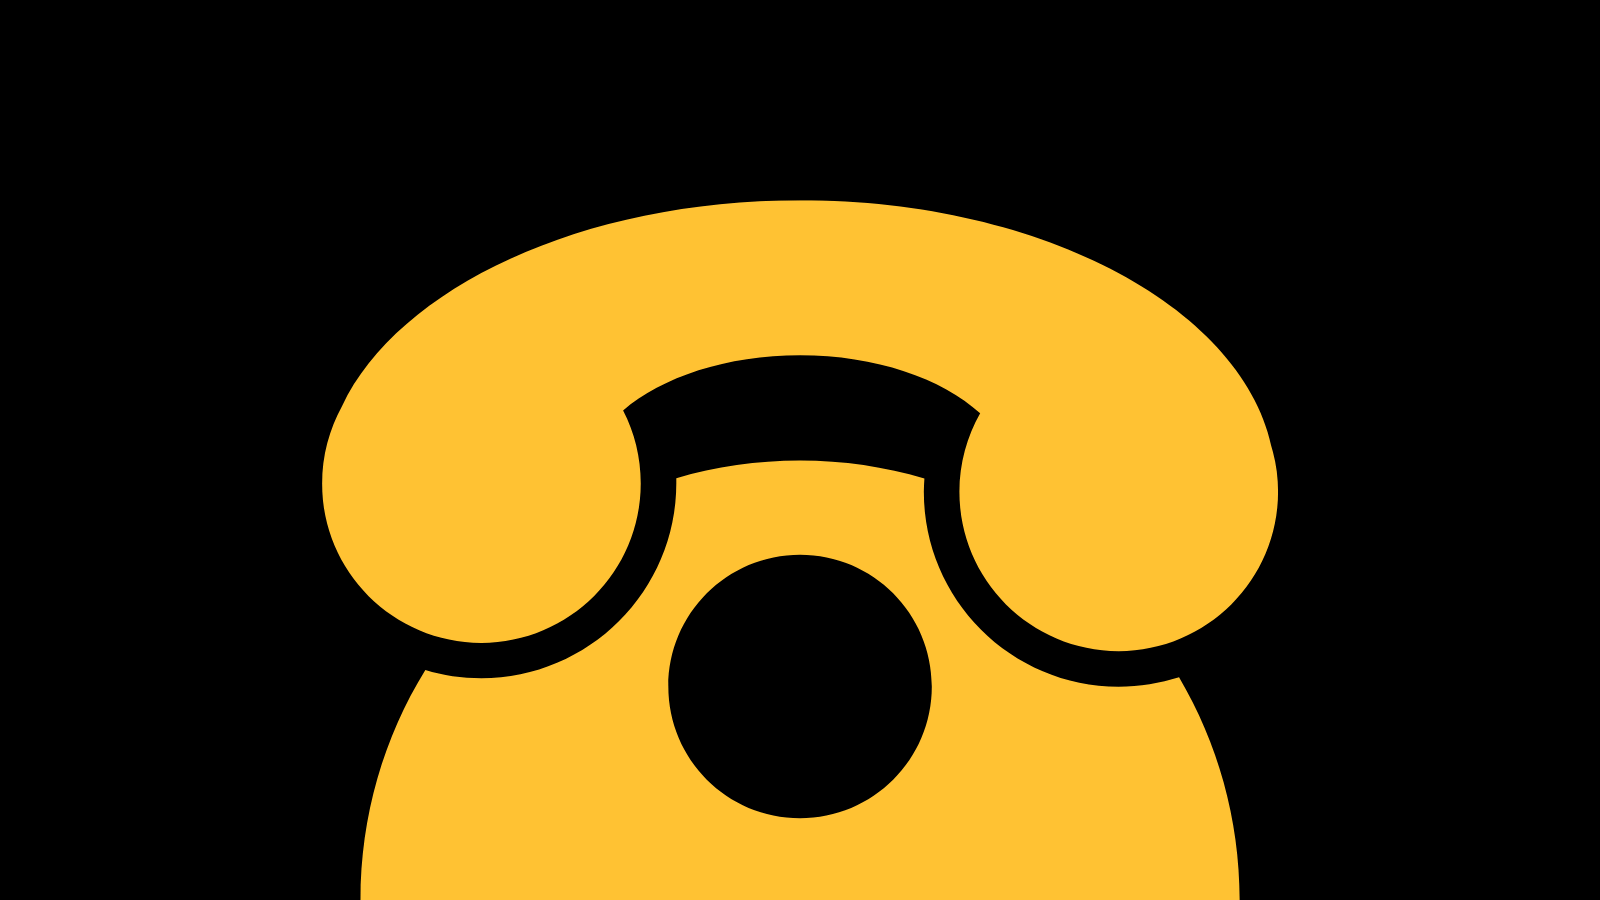 An icon of an old-fashioned phone